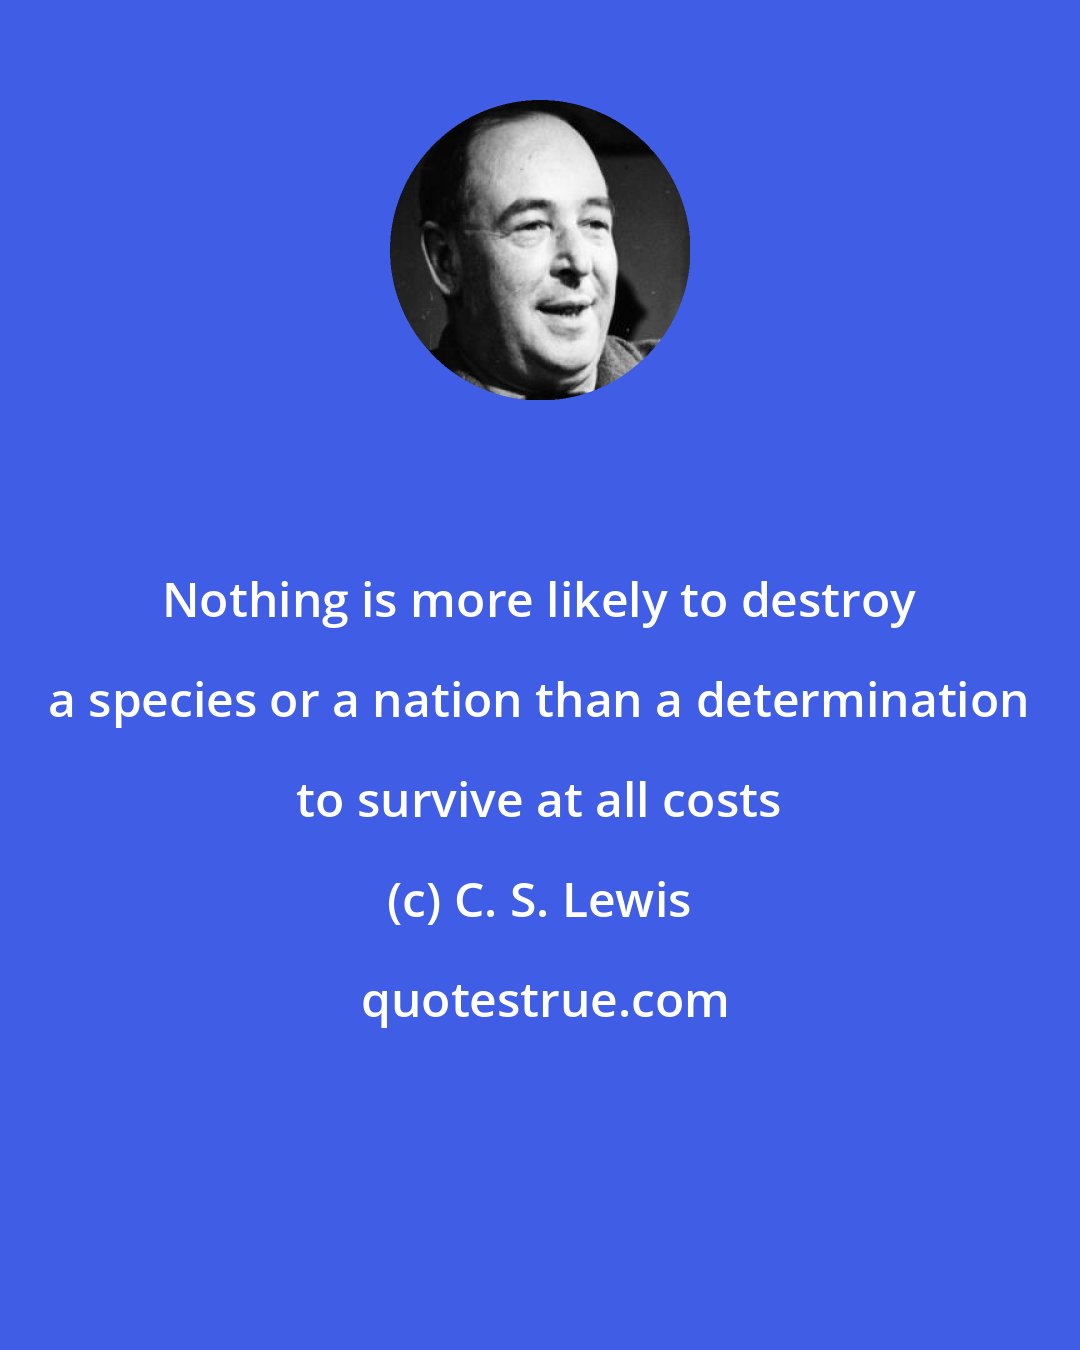 C. S. Lewis: Nothing is more likely to destroy a species or a nation than a determination to survive at all costs